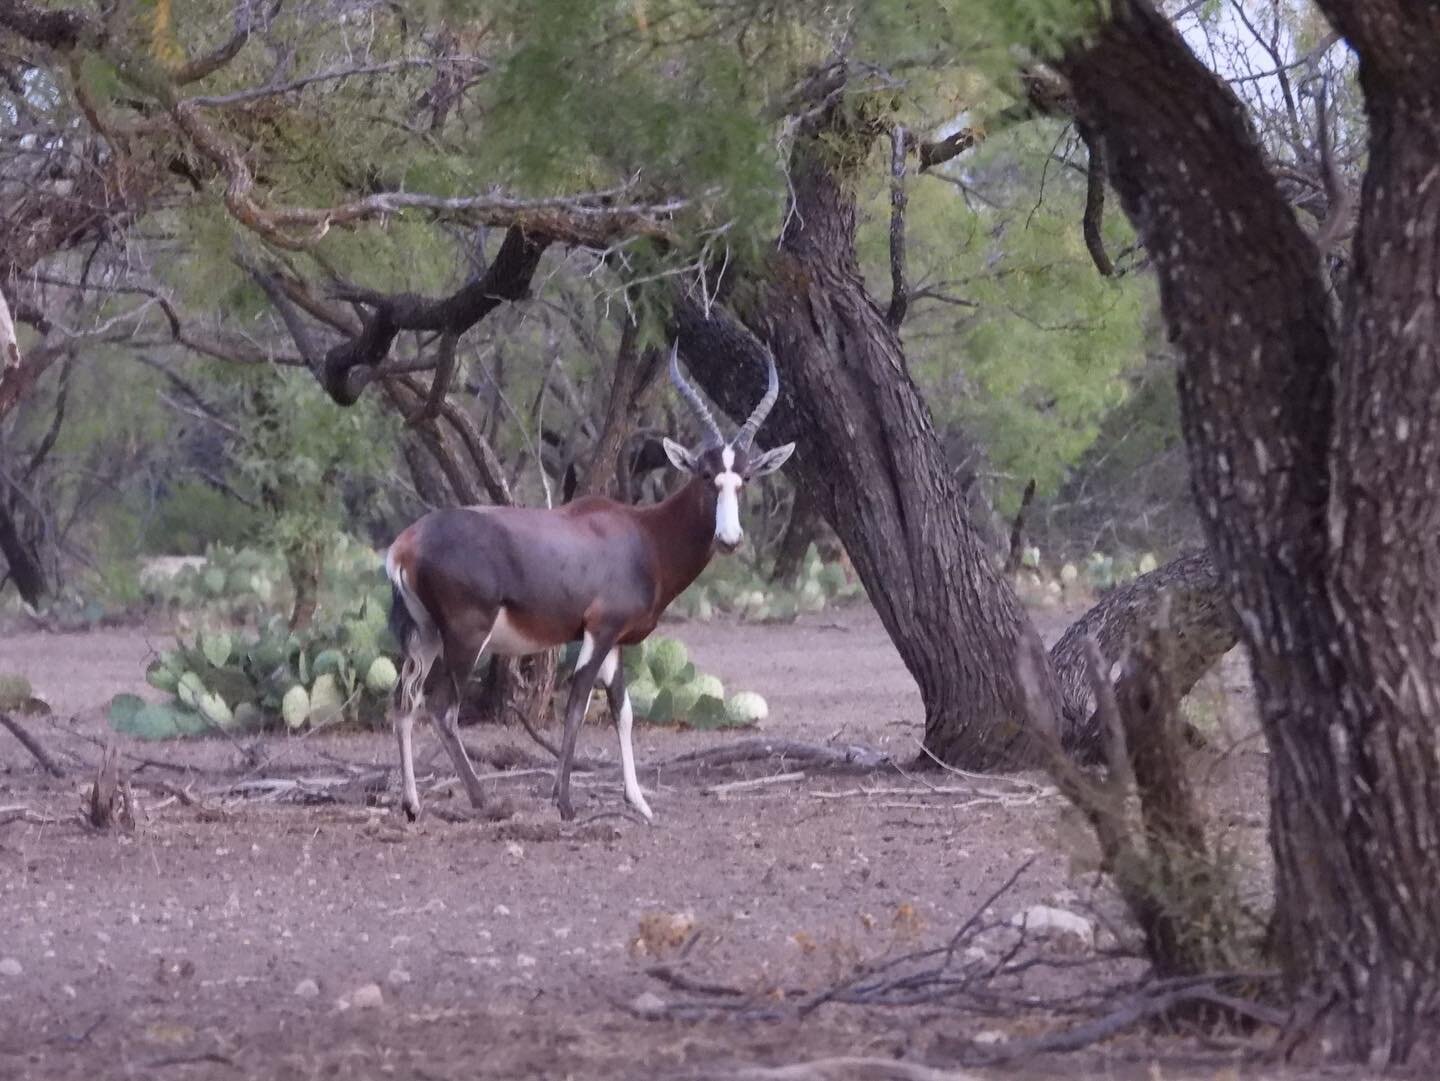 Here&rsquo;s a glimpse of a very nice Blesbok out for a stroll this evening! Stay tuned for more pics to come as we kick off our hunting season!

We still have select openings for the 2023-2024 hunting season! Reach out today to get on the books, we 